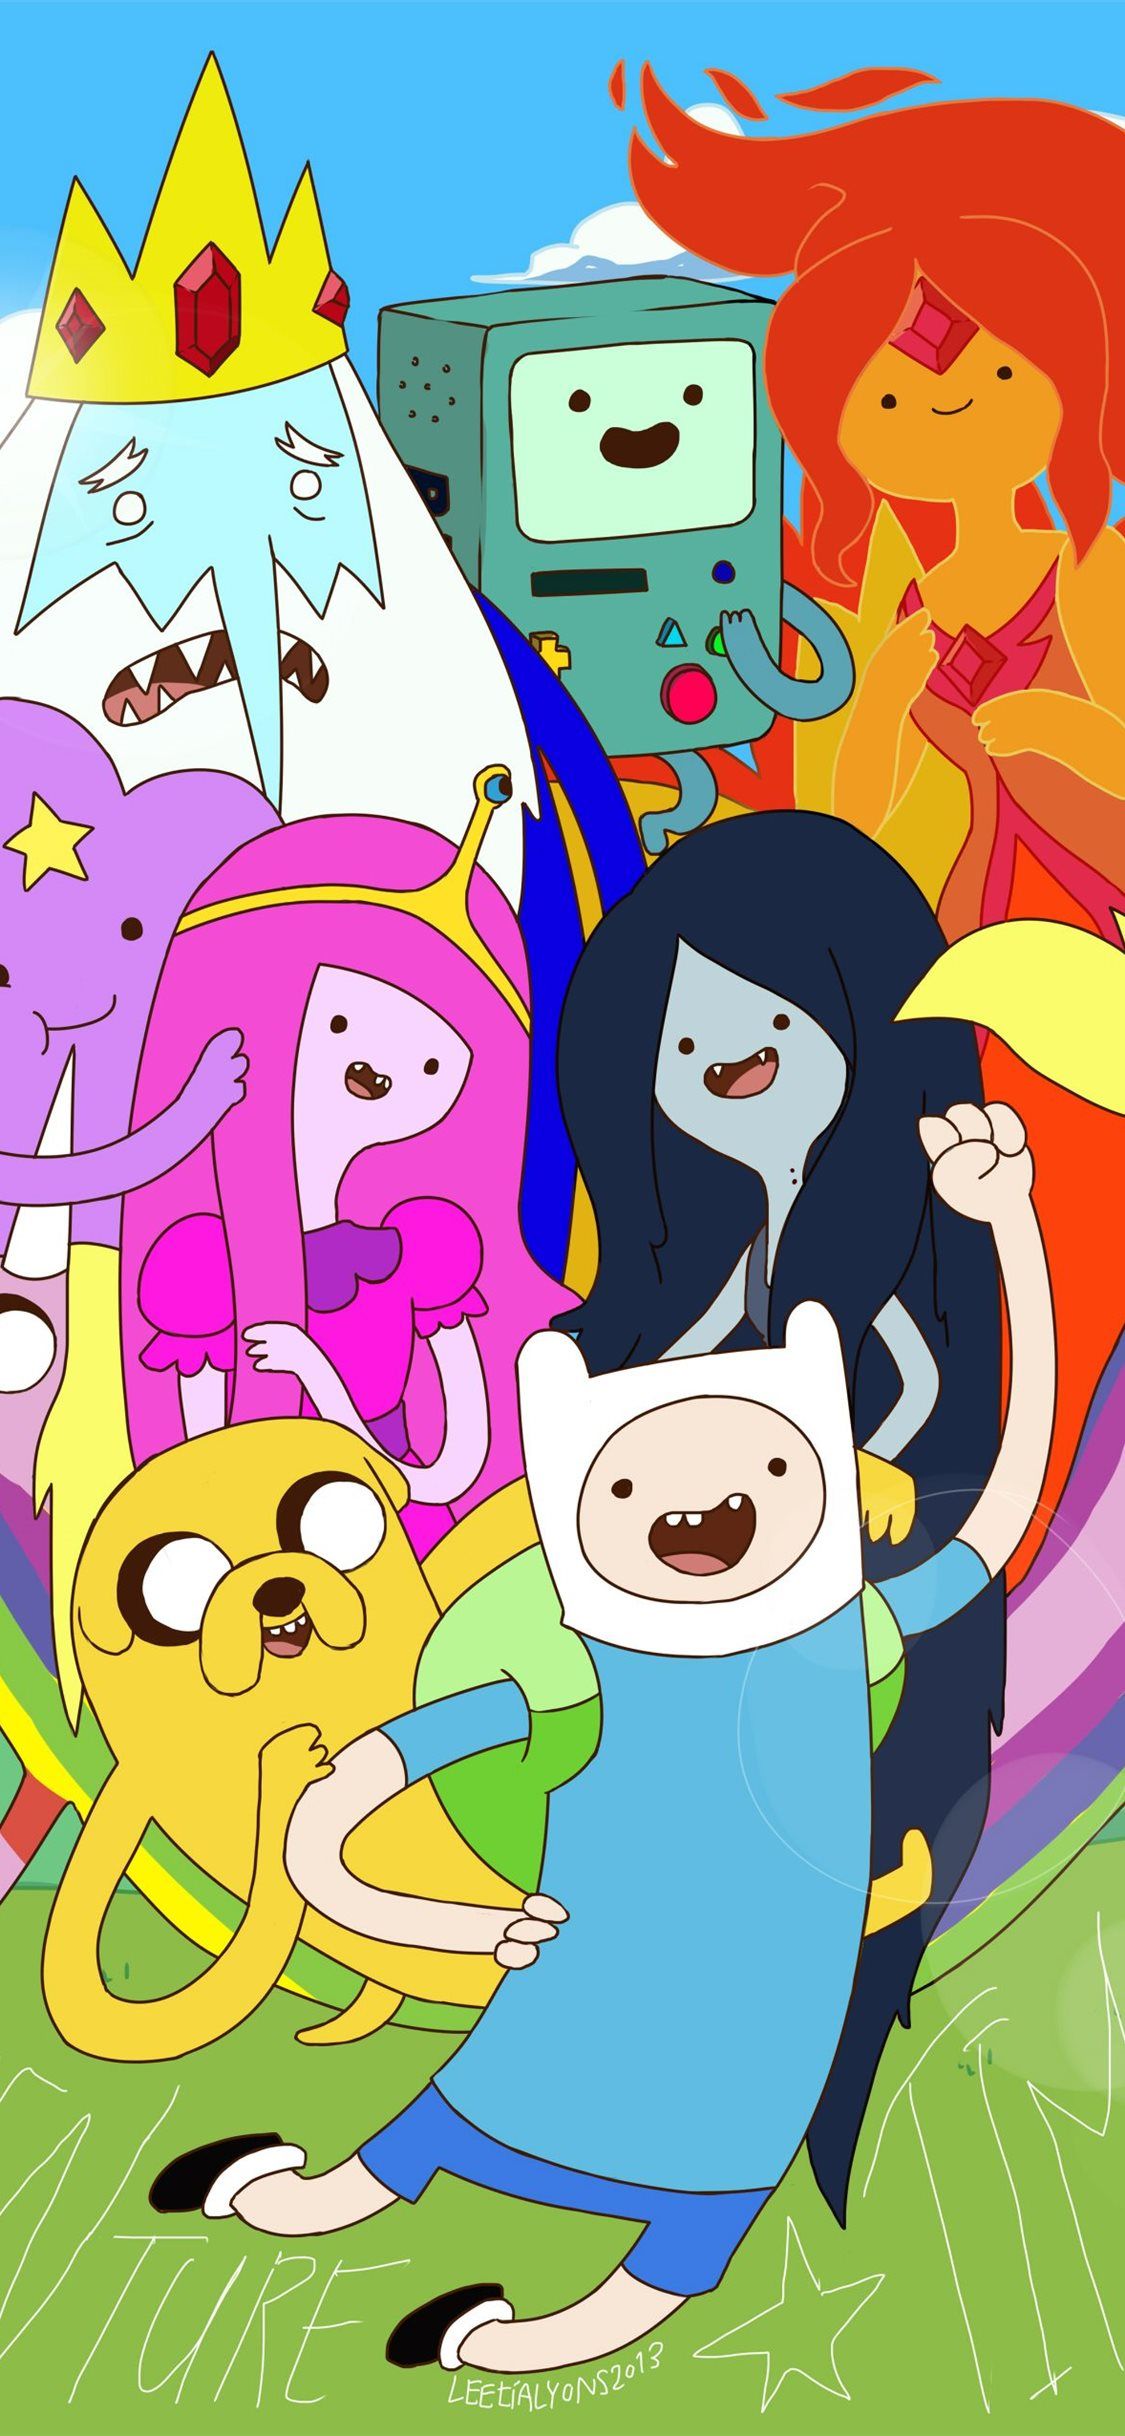 Adventure Time With Finn and Jake Fan Art Adventur. iPhone Wallpaper Free Download